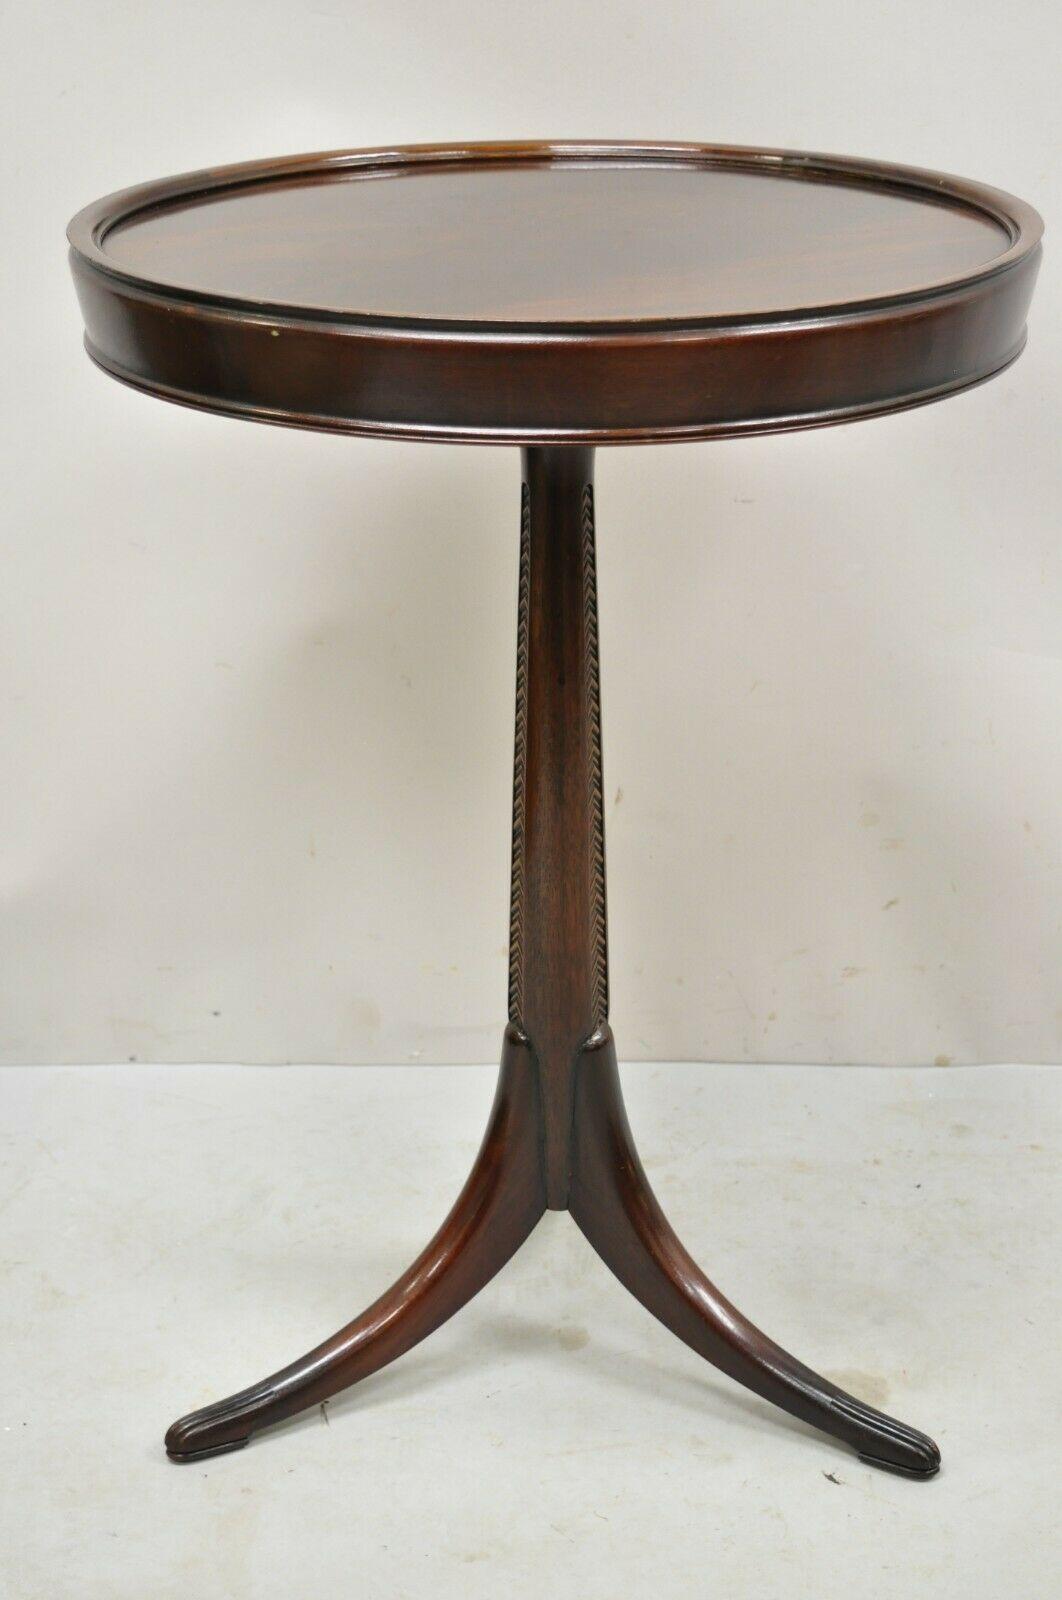 Antique French Art Deco carved tripod base mahogany side table. Item features carved tripod base, crotch mahogany top, sleek tapered shaft, beautiful wood grain, clean modernist lines, great style and form. Circa Early to Mid 20th Century.